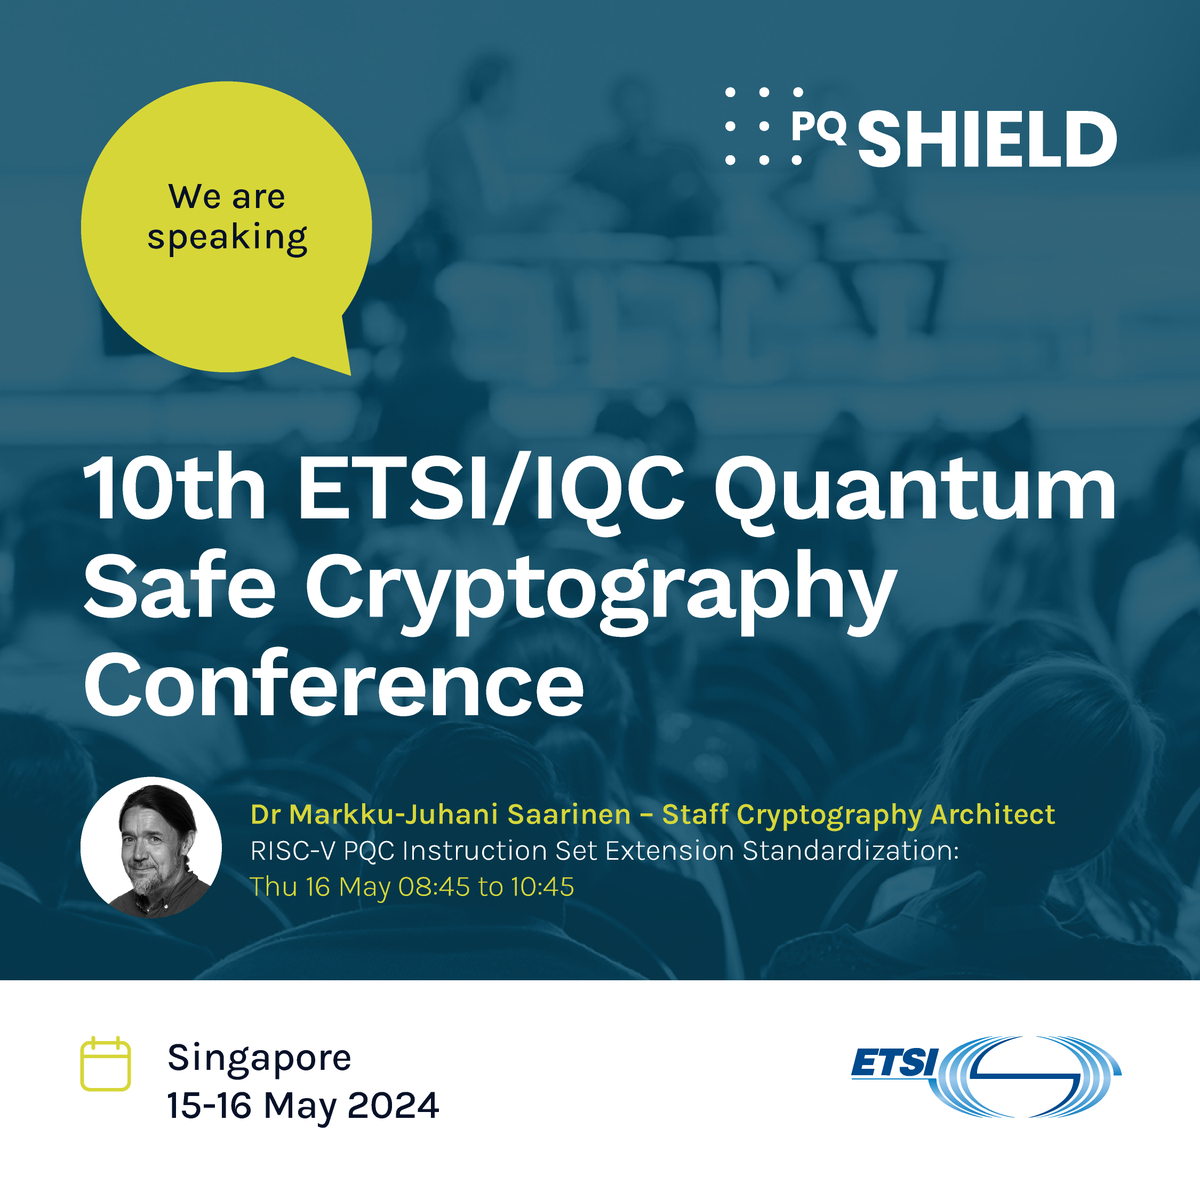 Our Staff Cryptography Architect Markku-Juhani O. Saarinen will be speaking on - 'RISC-V PQC Instruction Set Extension Standardization' at the ETSI/IQC Quantum Safe Cryptography Conference in Singapore, 15-16 May 2024. #cryptography #RISCV #PQC